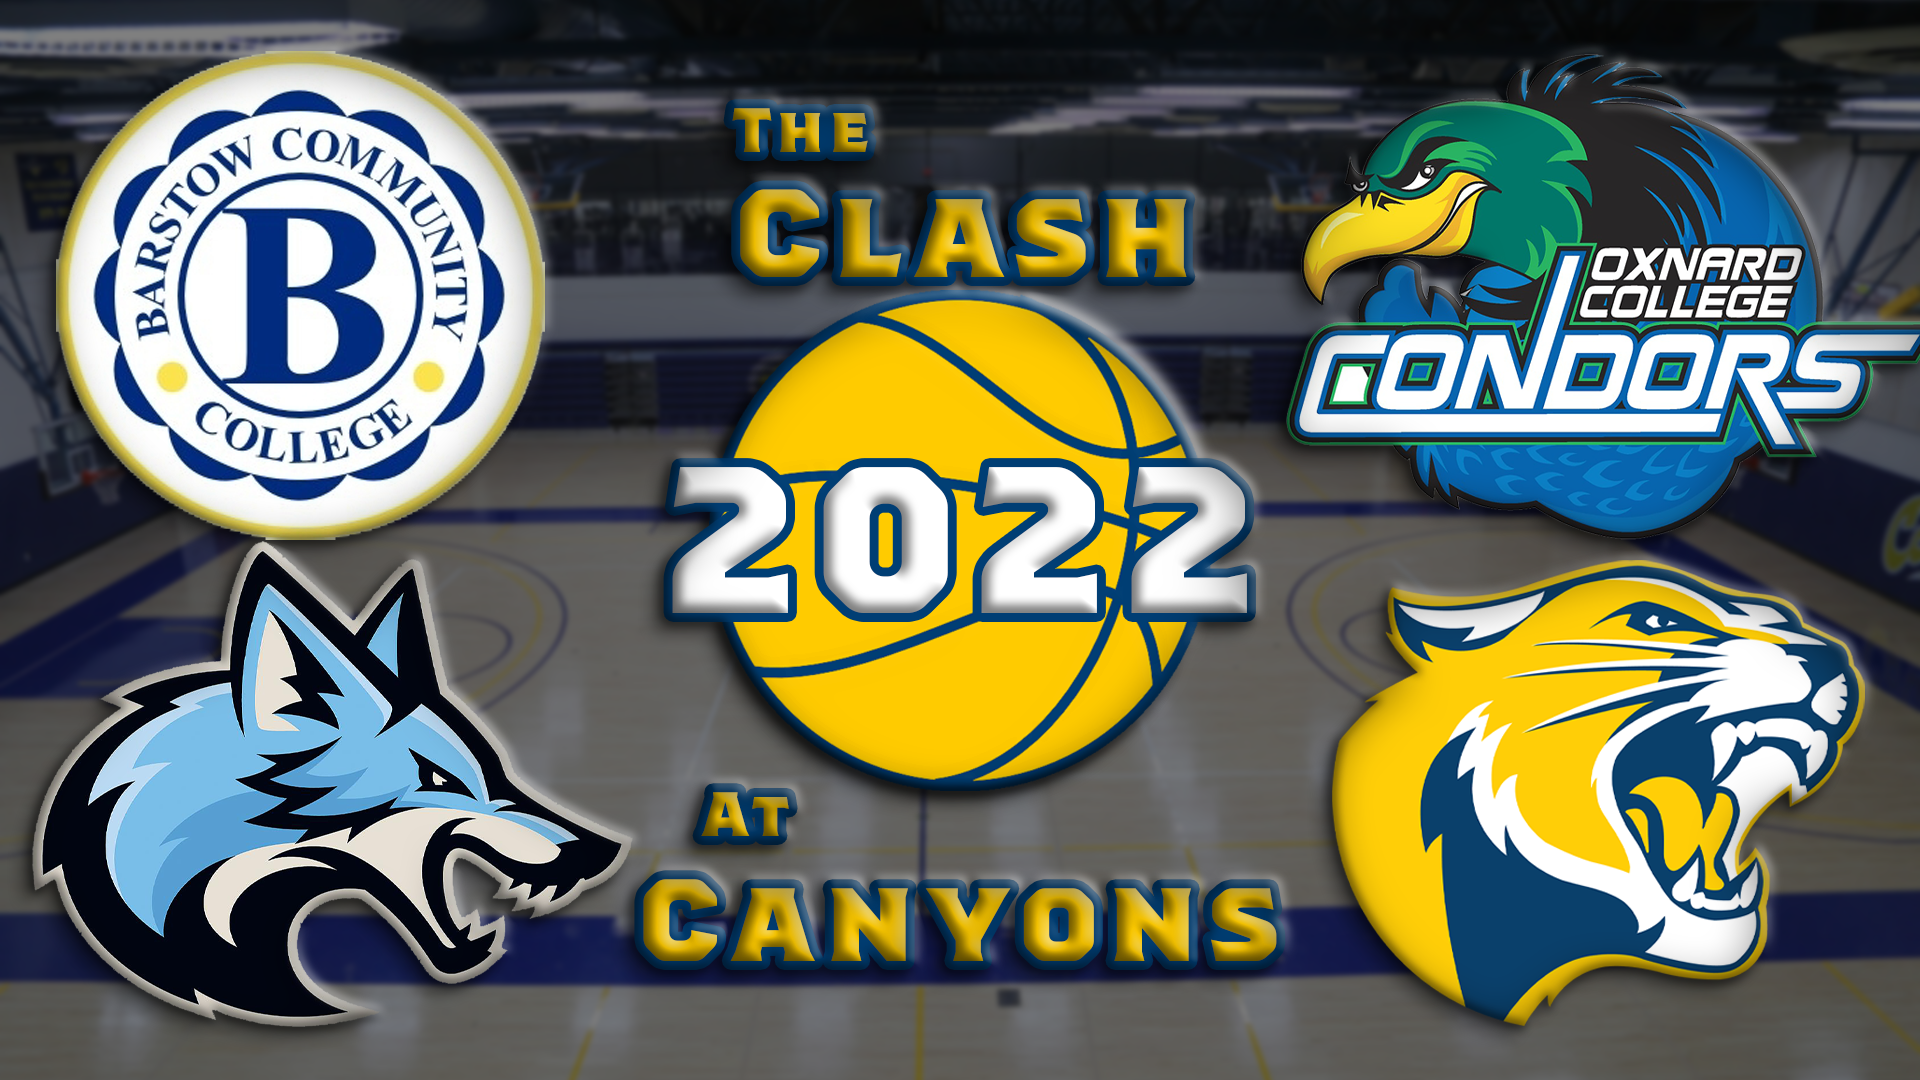 Clash at Canyons informational graphic.